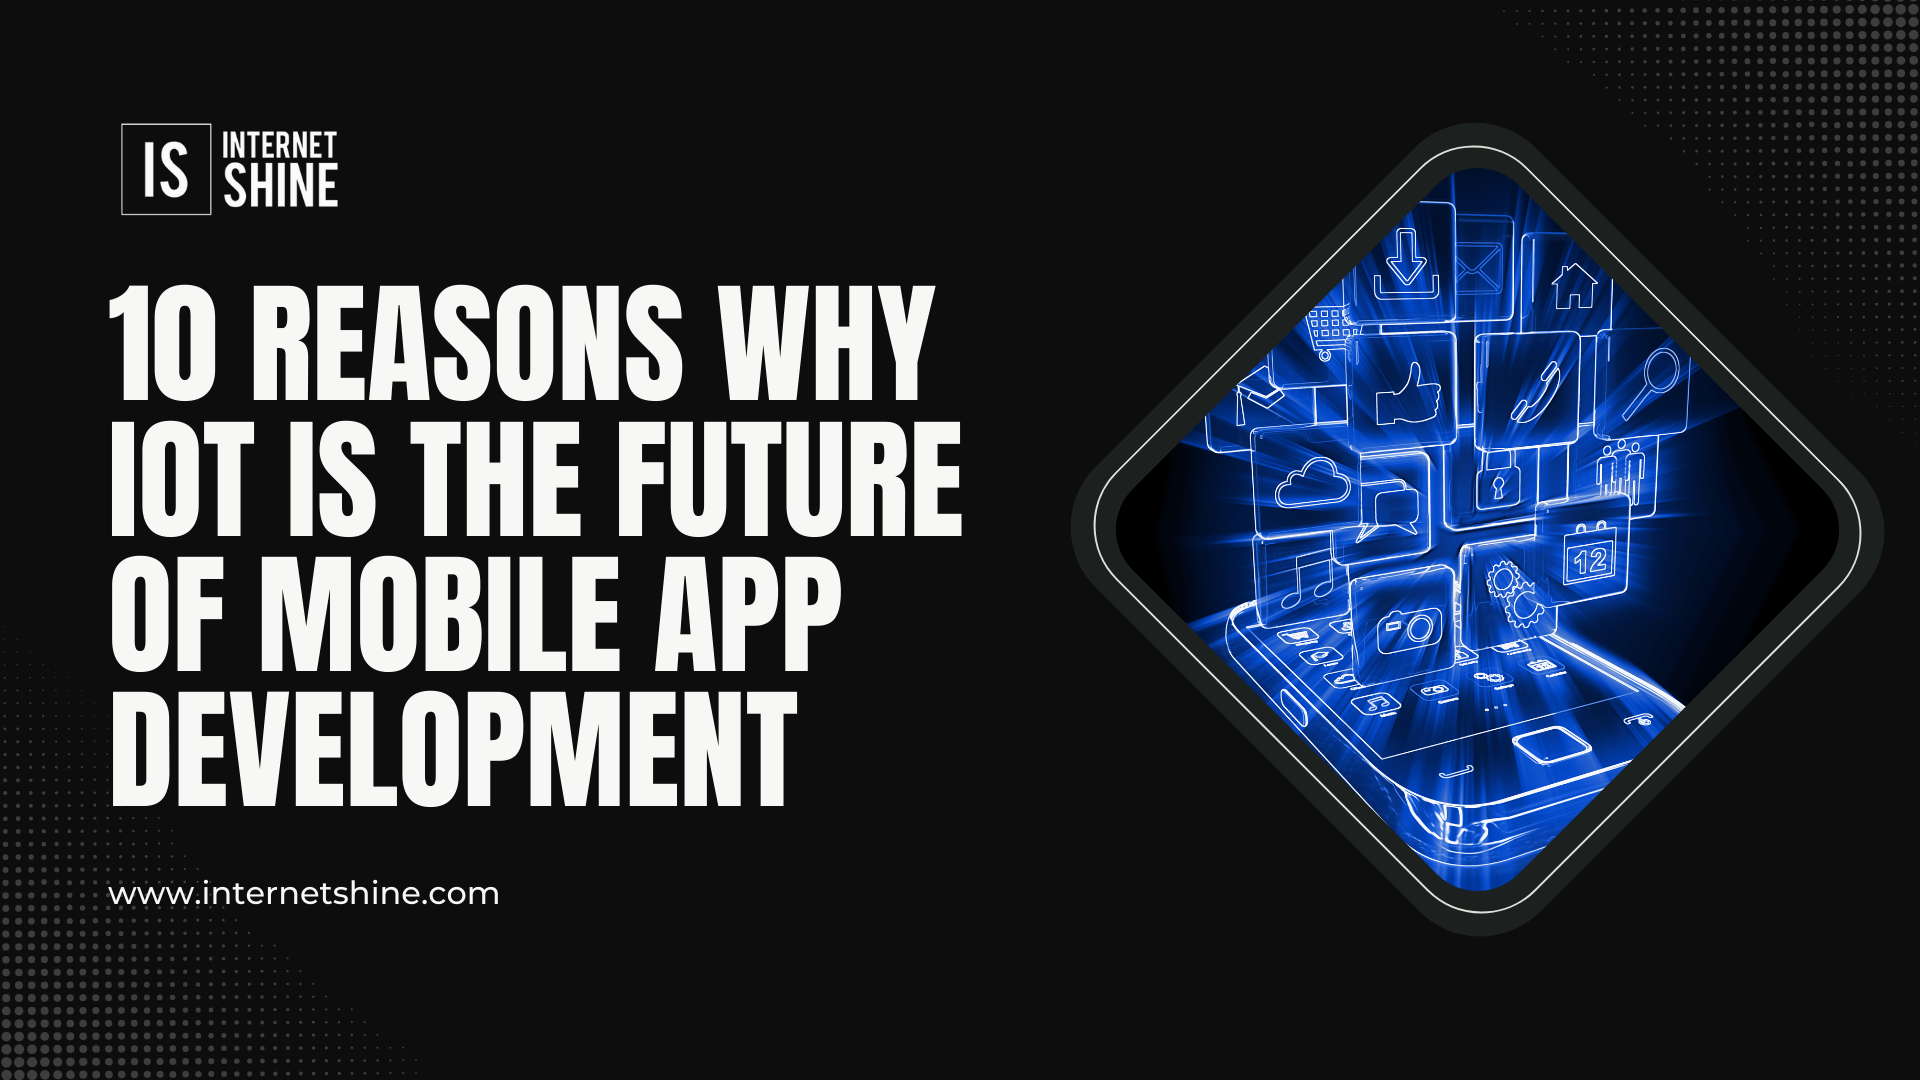 10 Reasons Why IoT is the Future of Mobile App Development